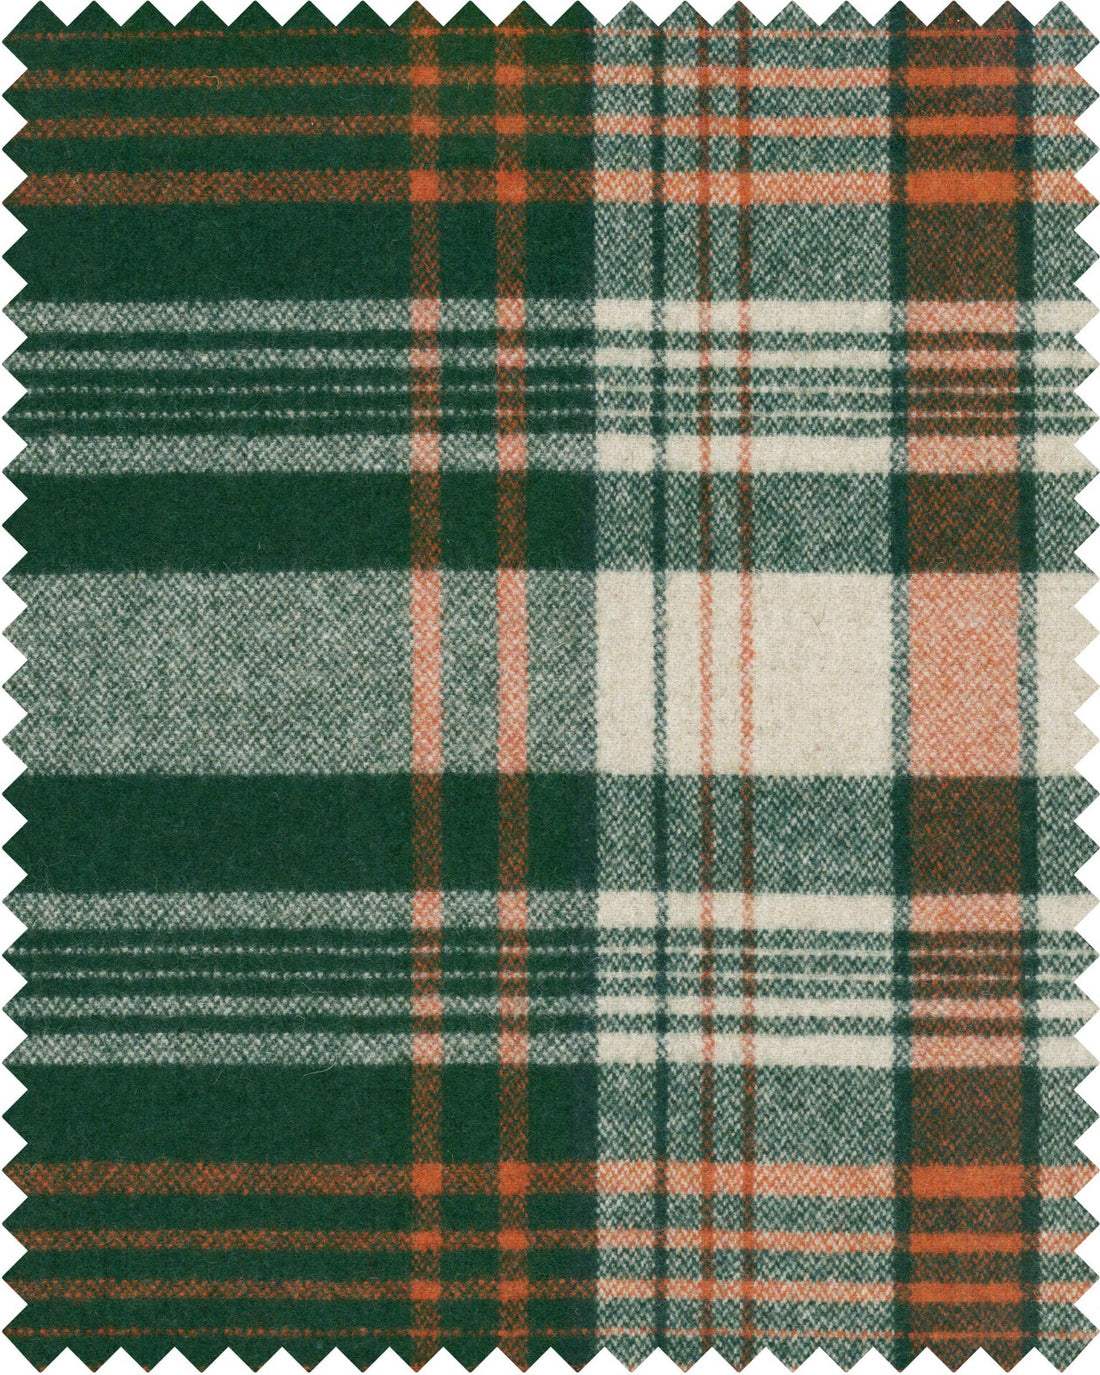 Monterey Plaid fabric in green color - pattern number FB00088 - by Mind The Gap in the Woodstock collection